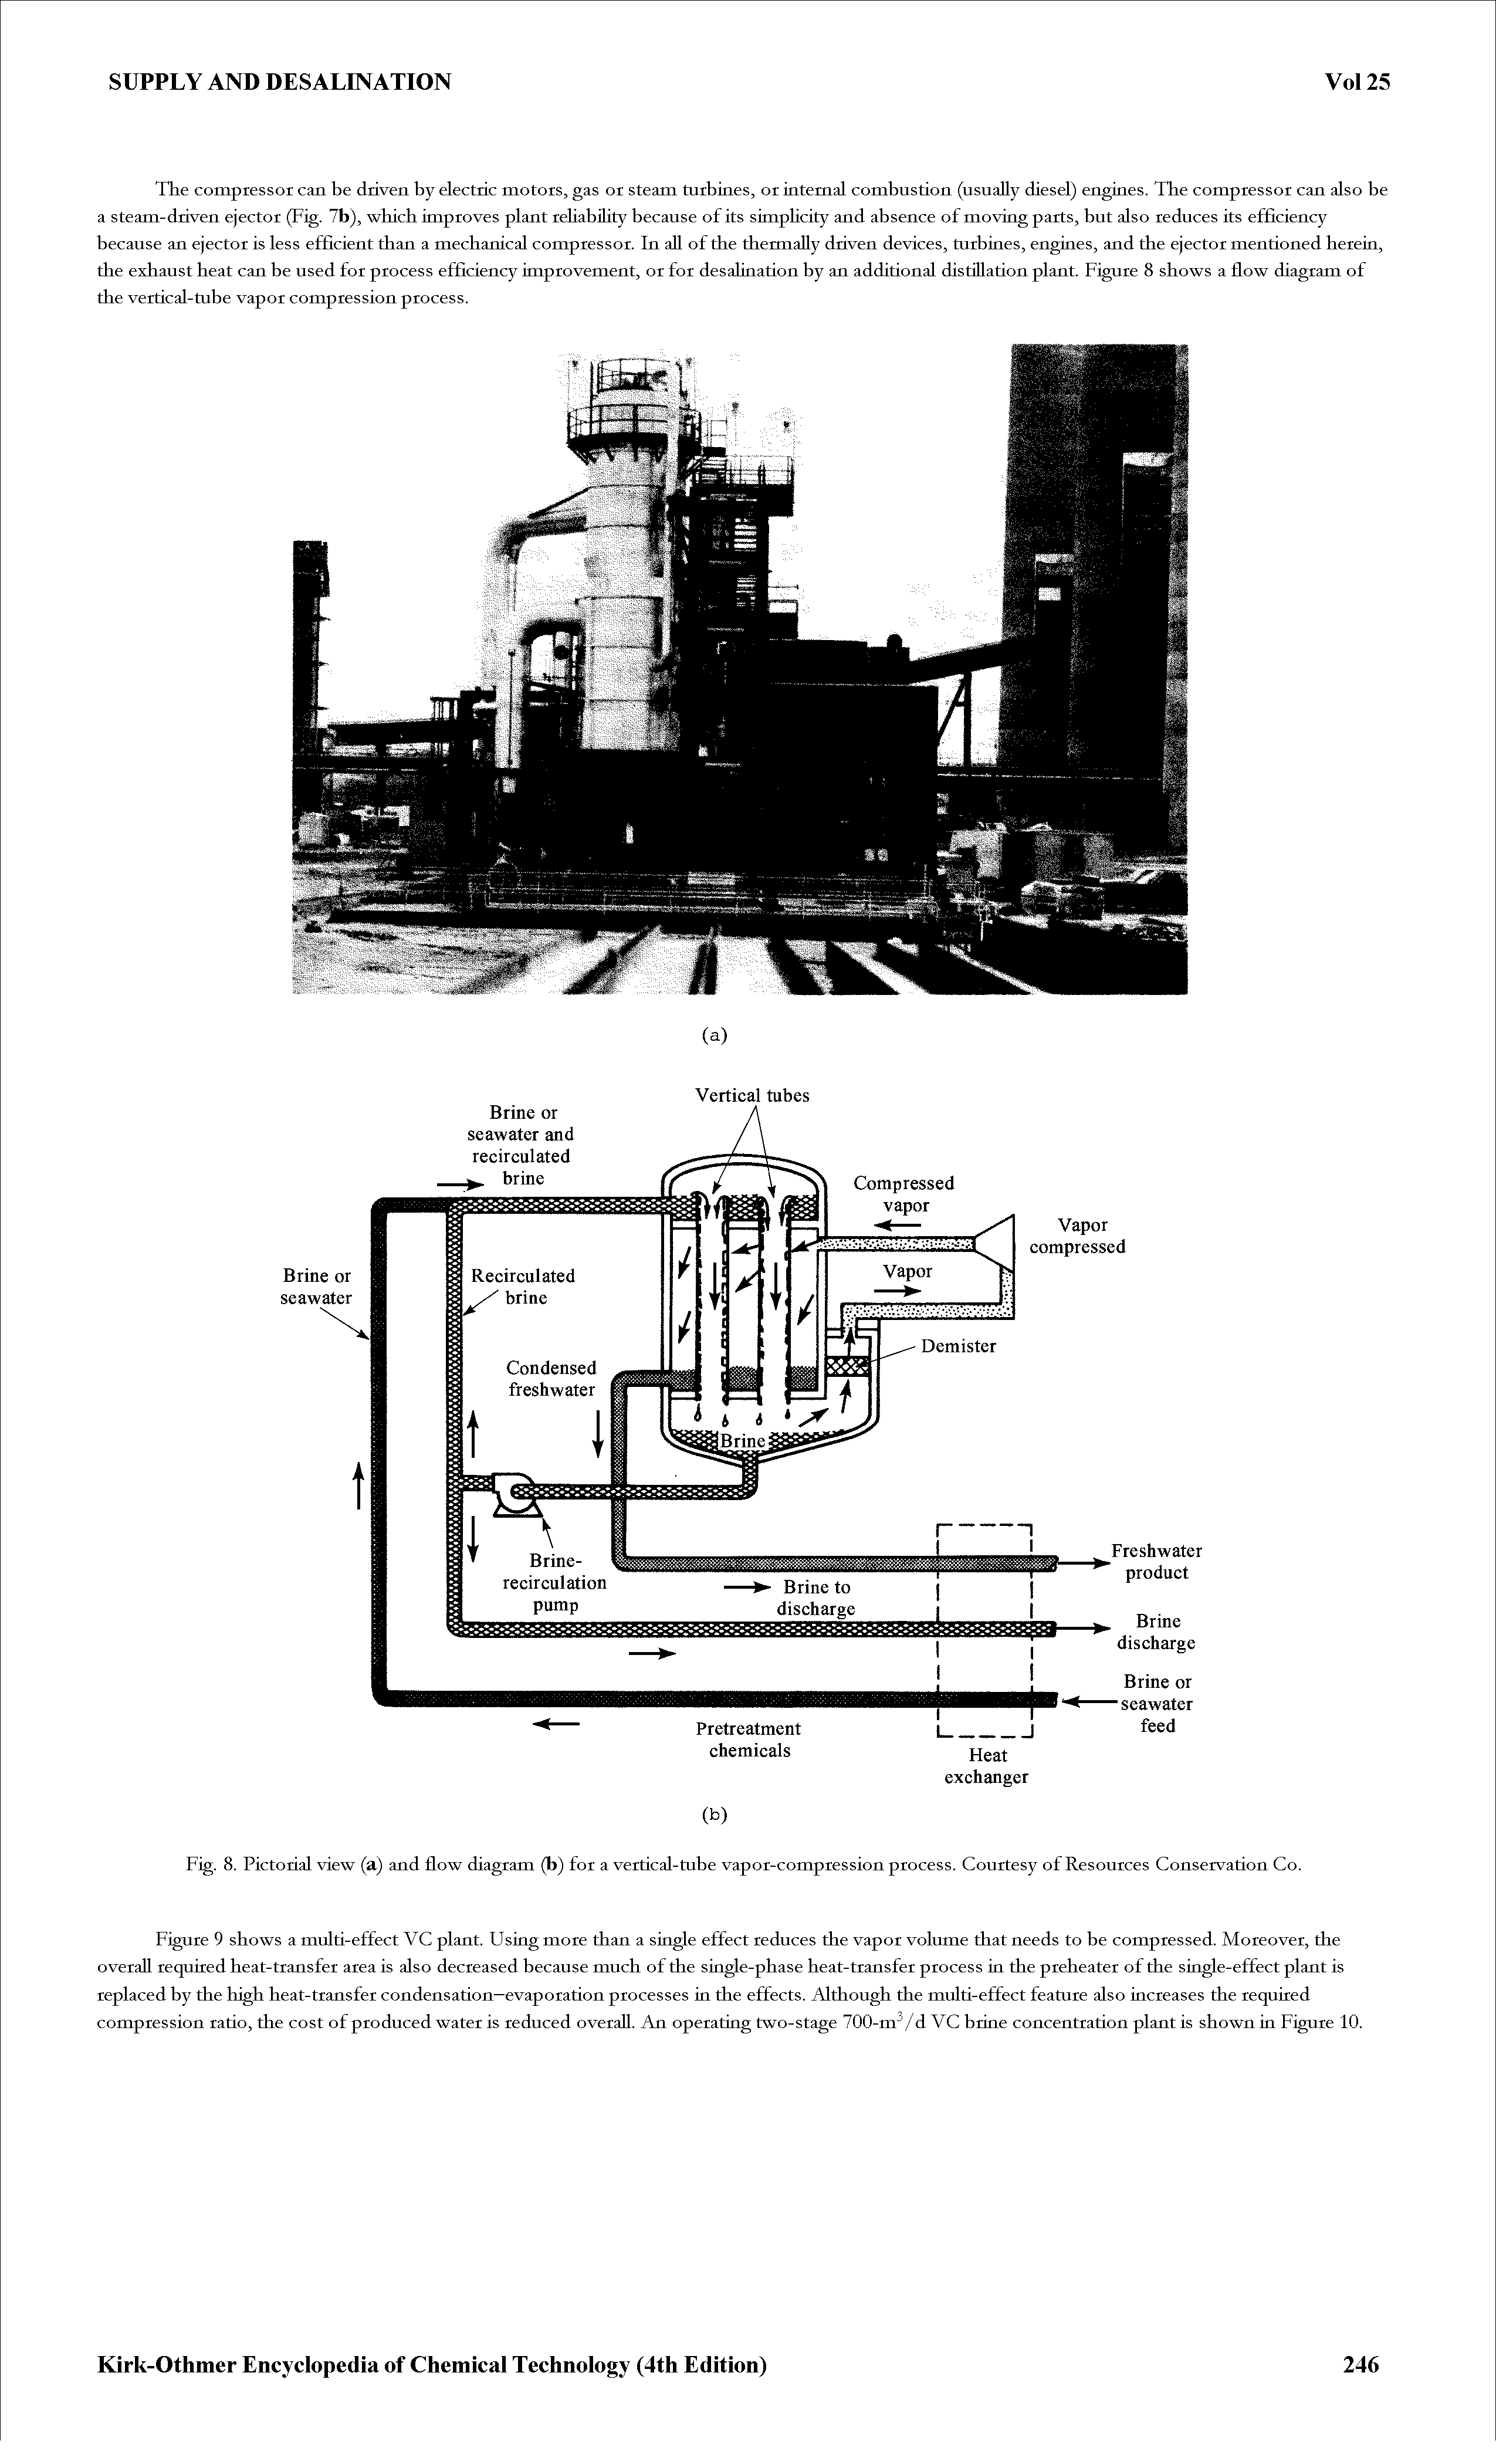 Fig. 8. Pictorial view (a) and flow diagram (b) for a vertical-tube vapor-compression process. Courtesy of Resources Conservation Co.